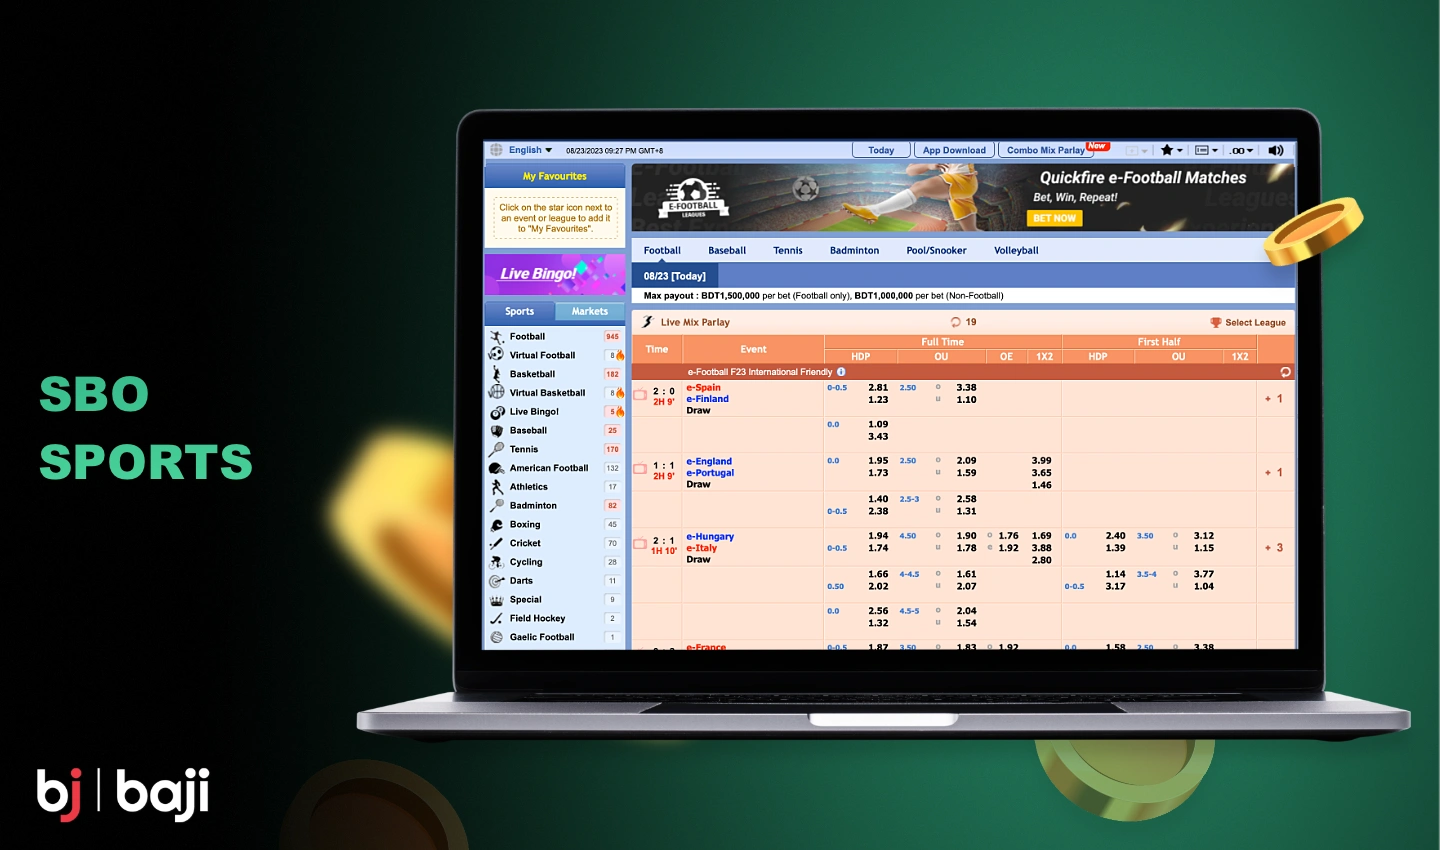 The SBO Sports section on the Baji platform offers betting on dozens of sports, live streaming and much more to its users